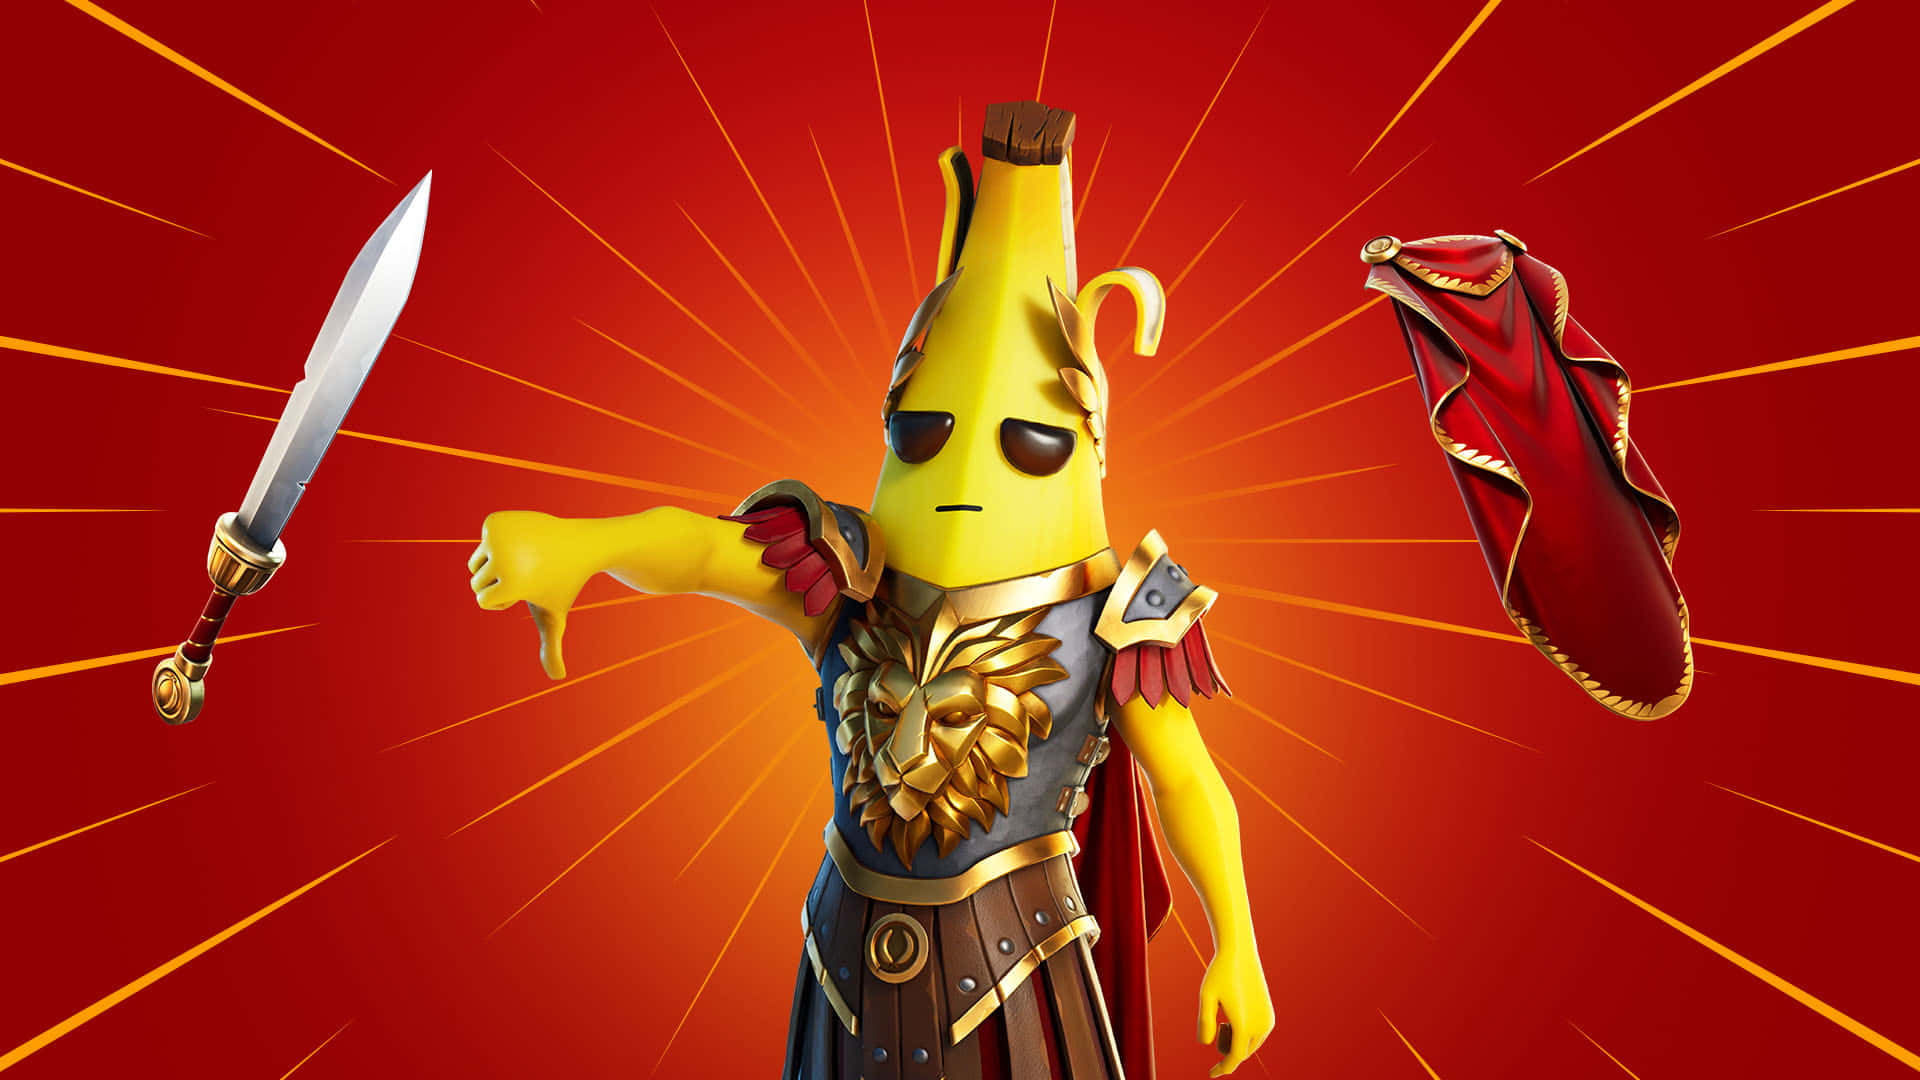 Download wallpapers Peely 4k yellow neon lights Fortnite Battle Royale  Fortnite characters Peely Skin Fortnite Peely Fortnite for desktop with  resolution 3840x2400 High Quality HD pictures wallpapers